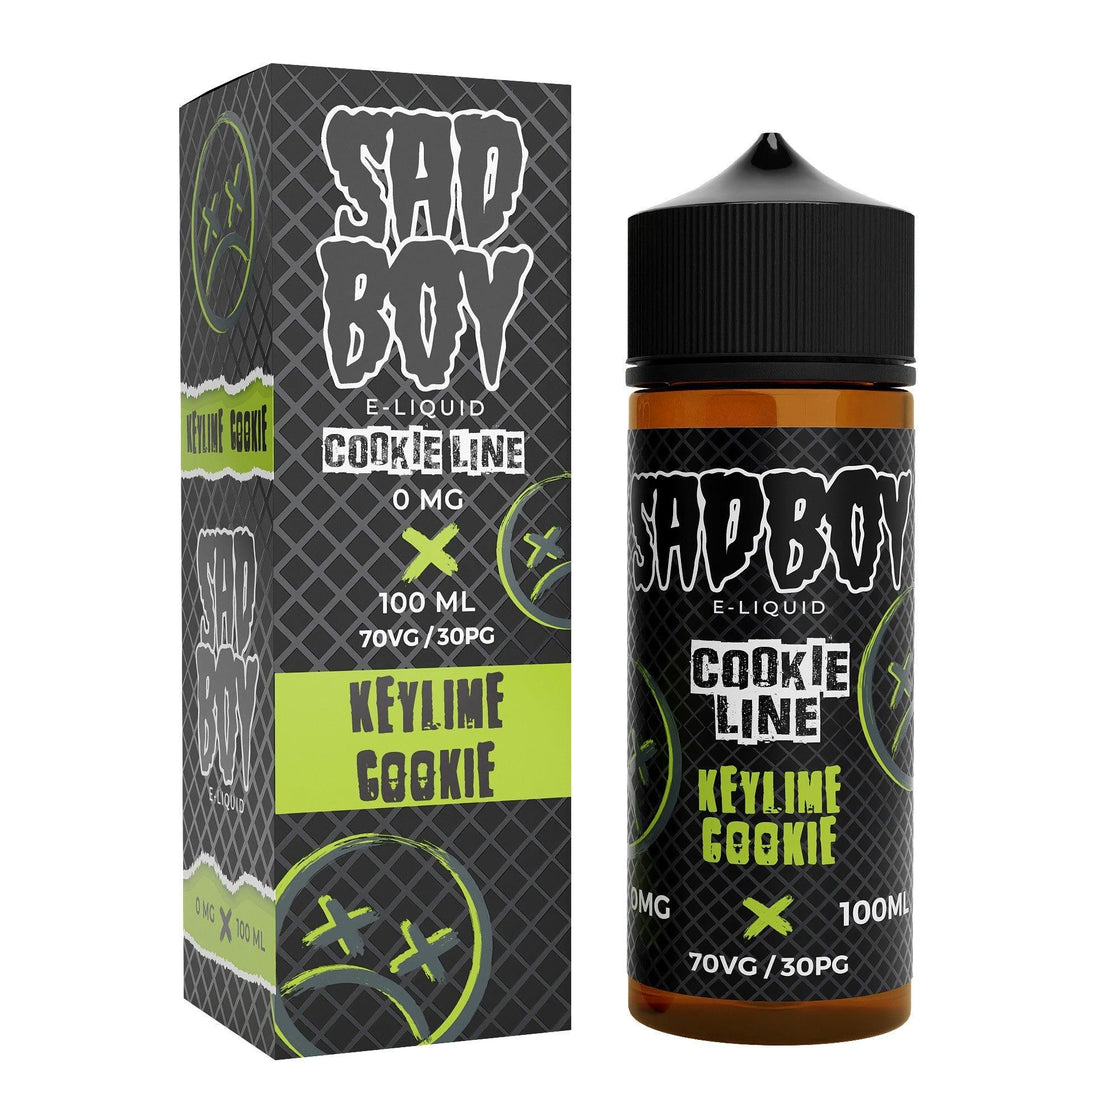 COOKIE LINE: KEYLIME COOKIE 100ML SHORT FILL E-LIQUID BY SAD BOY - Vapeslough